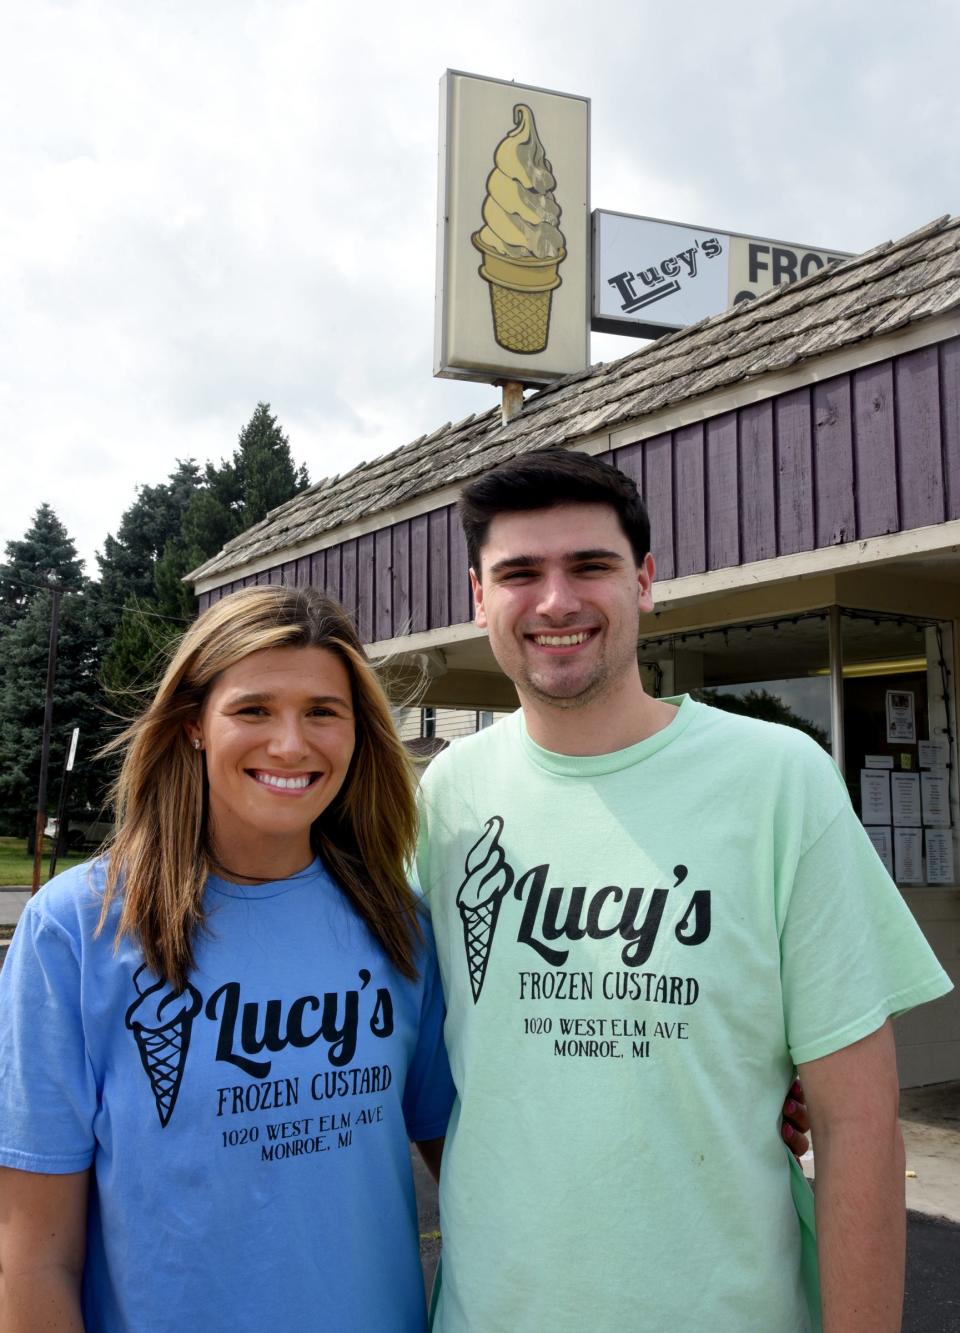 Lucy's Frozen Custard owners Taylor and Griffin Vuich on Teal Tuesdays are offering frozen custard cones with teal (blue raspberry) dip or with sprinkles. The proceeds are for the Teal Attack Volleyball game featuring SMCC and Airport High Schools to raise awareness and funds for ovarian cancer in the fall.